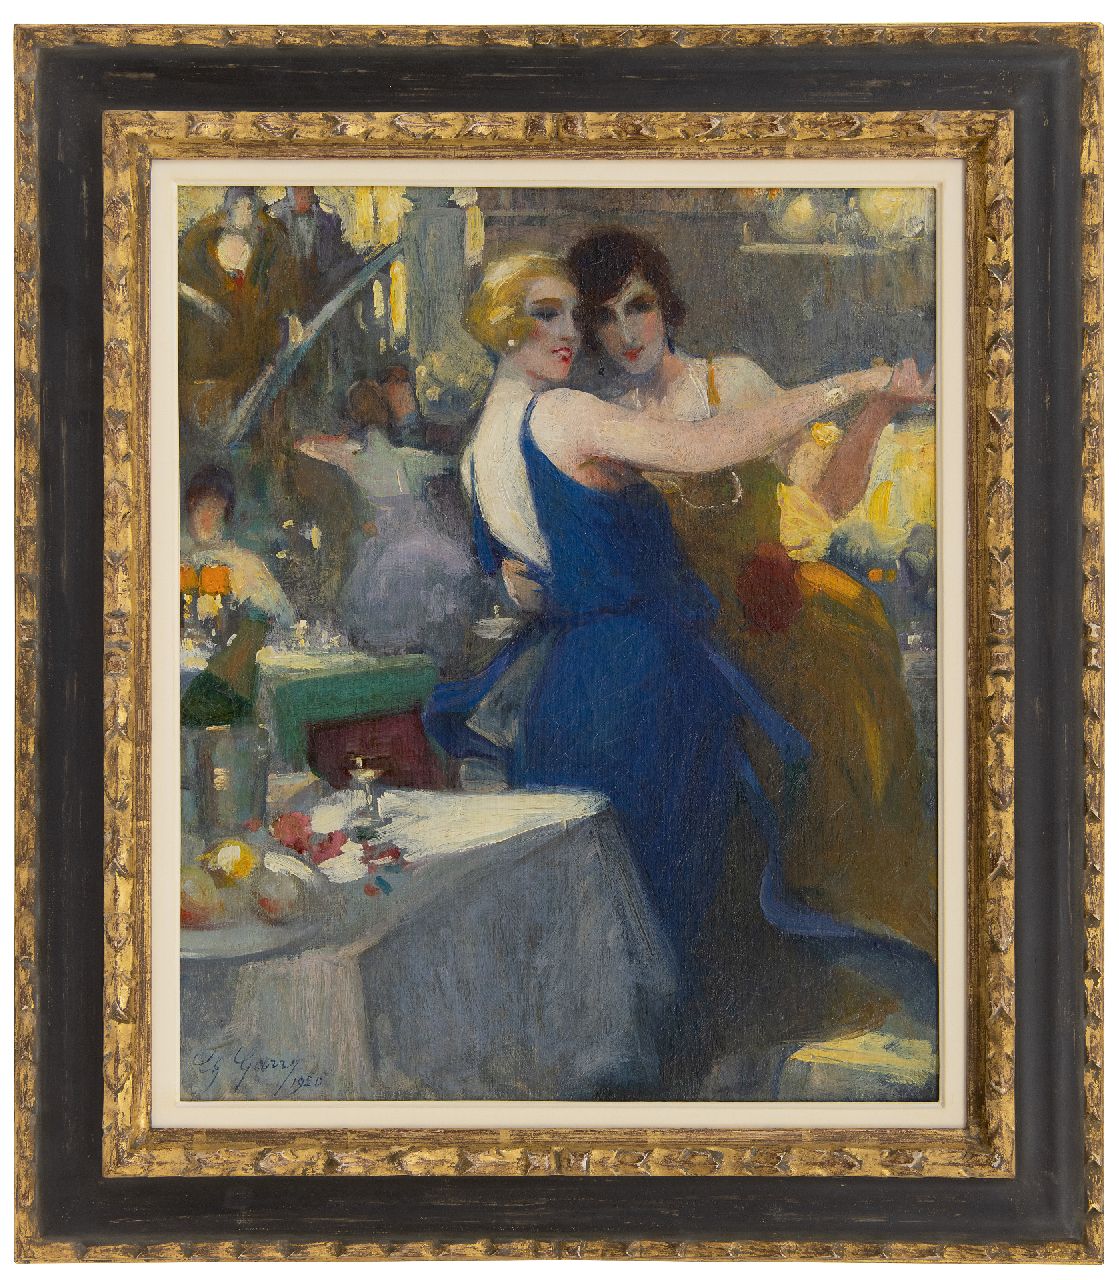 Garry C.  | Charley Garry | Paintings offered for sale | Two dancing women, oil on canvas 46.4 x 38.5 cm, signed l.l. and dated 1920